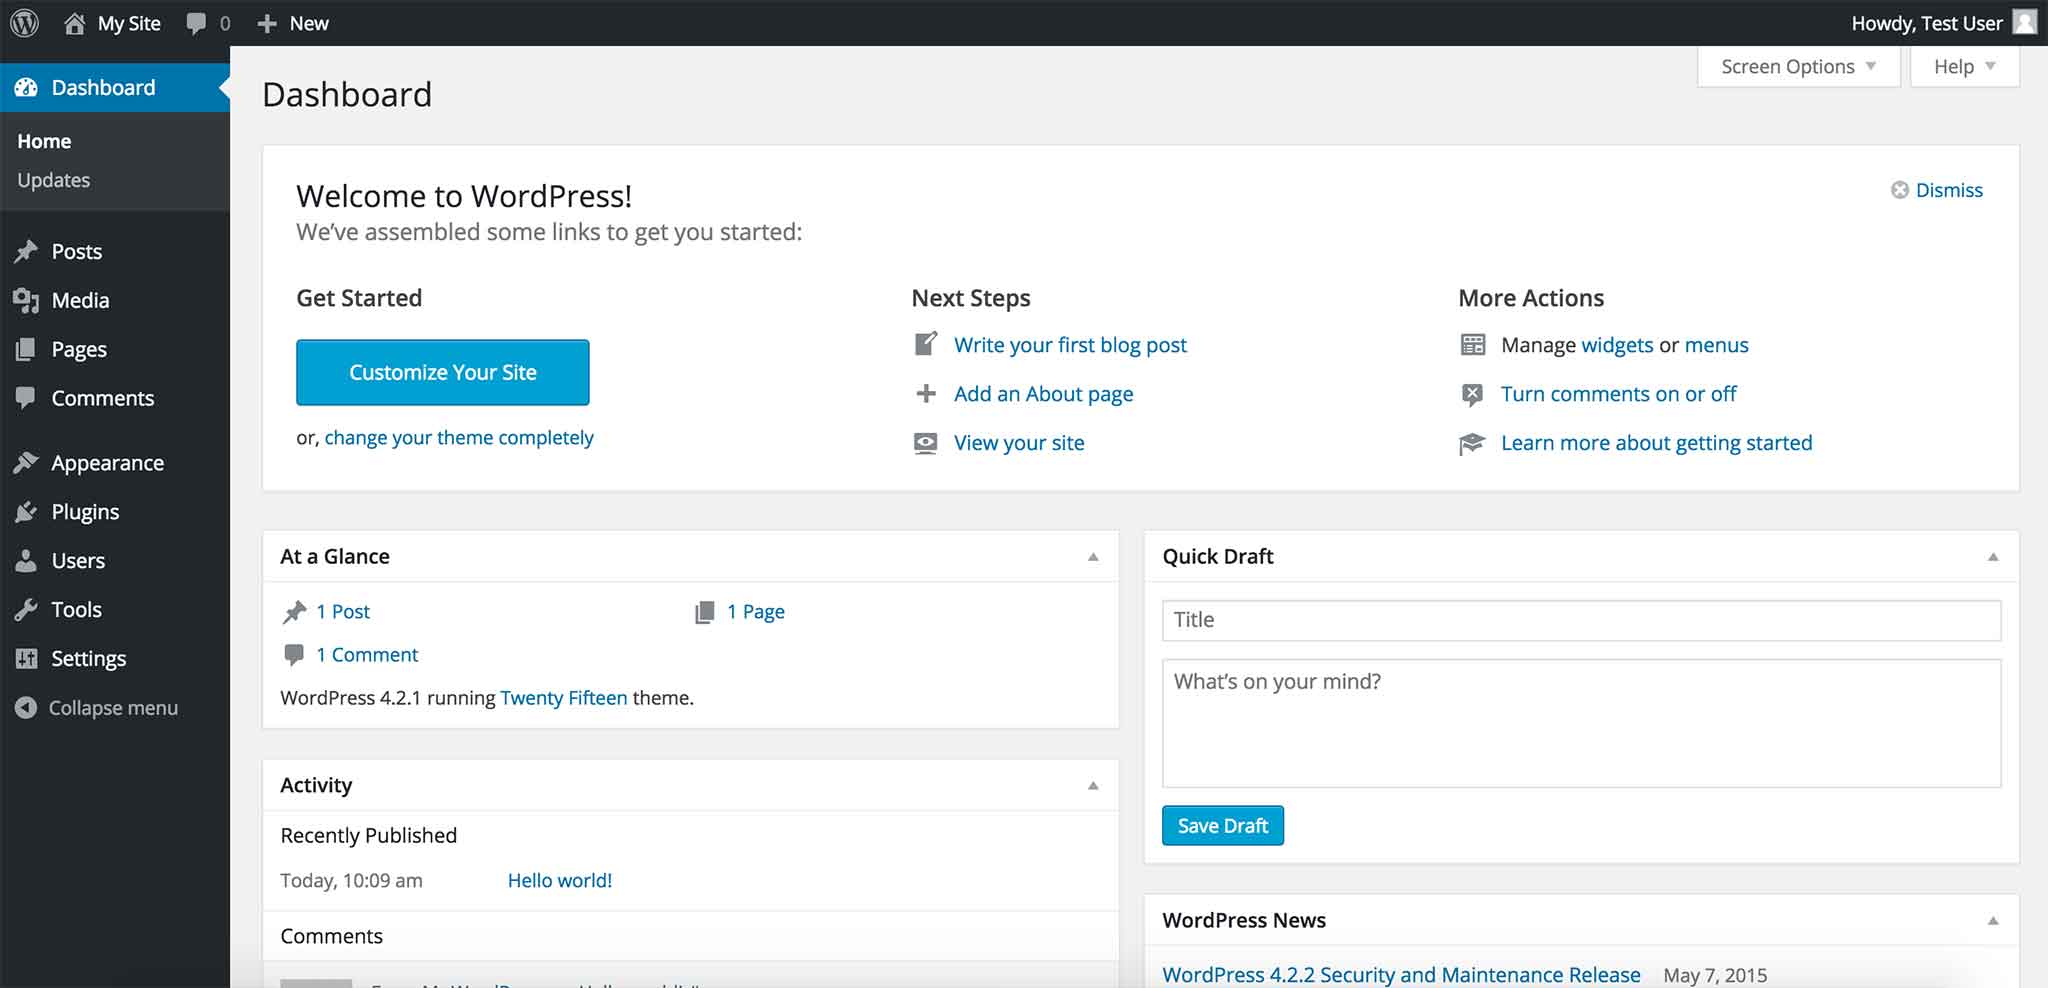 Example of WordPress Dashboard after installation